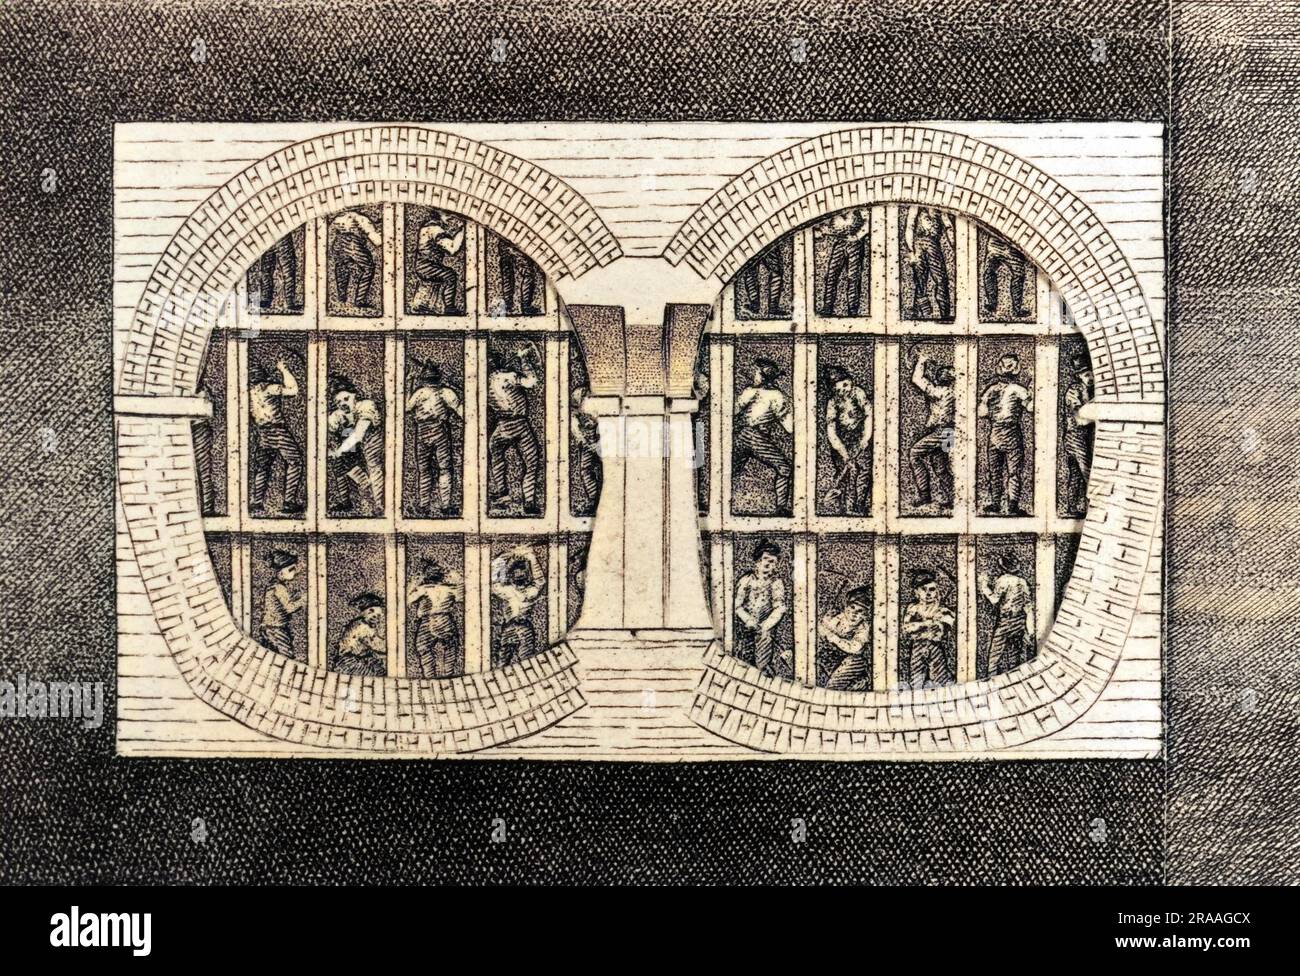 A detailed illustrated cross section of Brunel's Thames Tunnel in London during its construction.     Date: 1838 Stock Photo